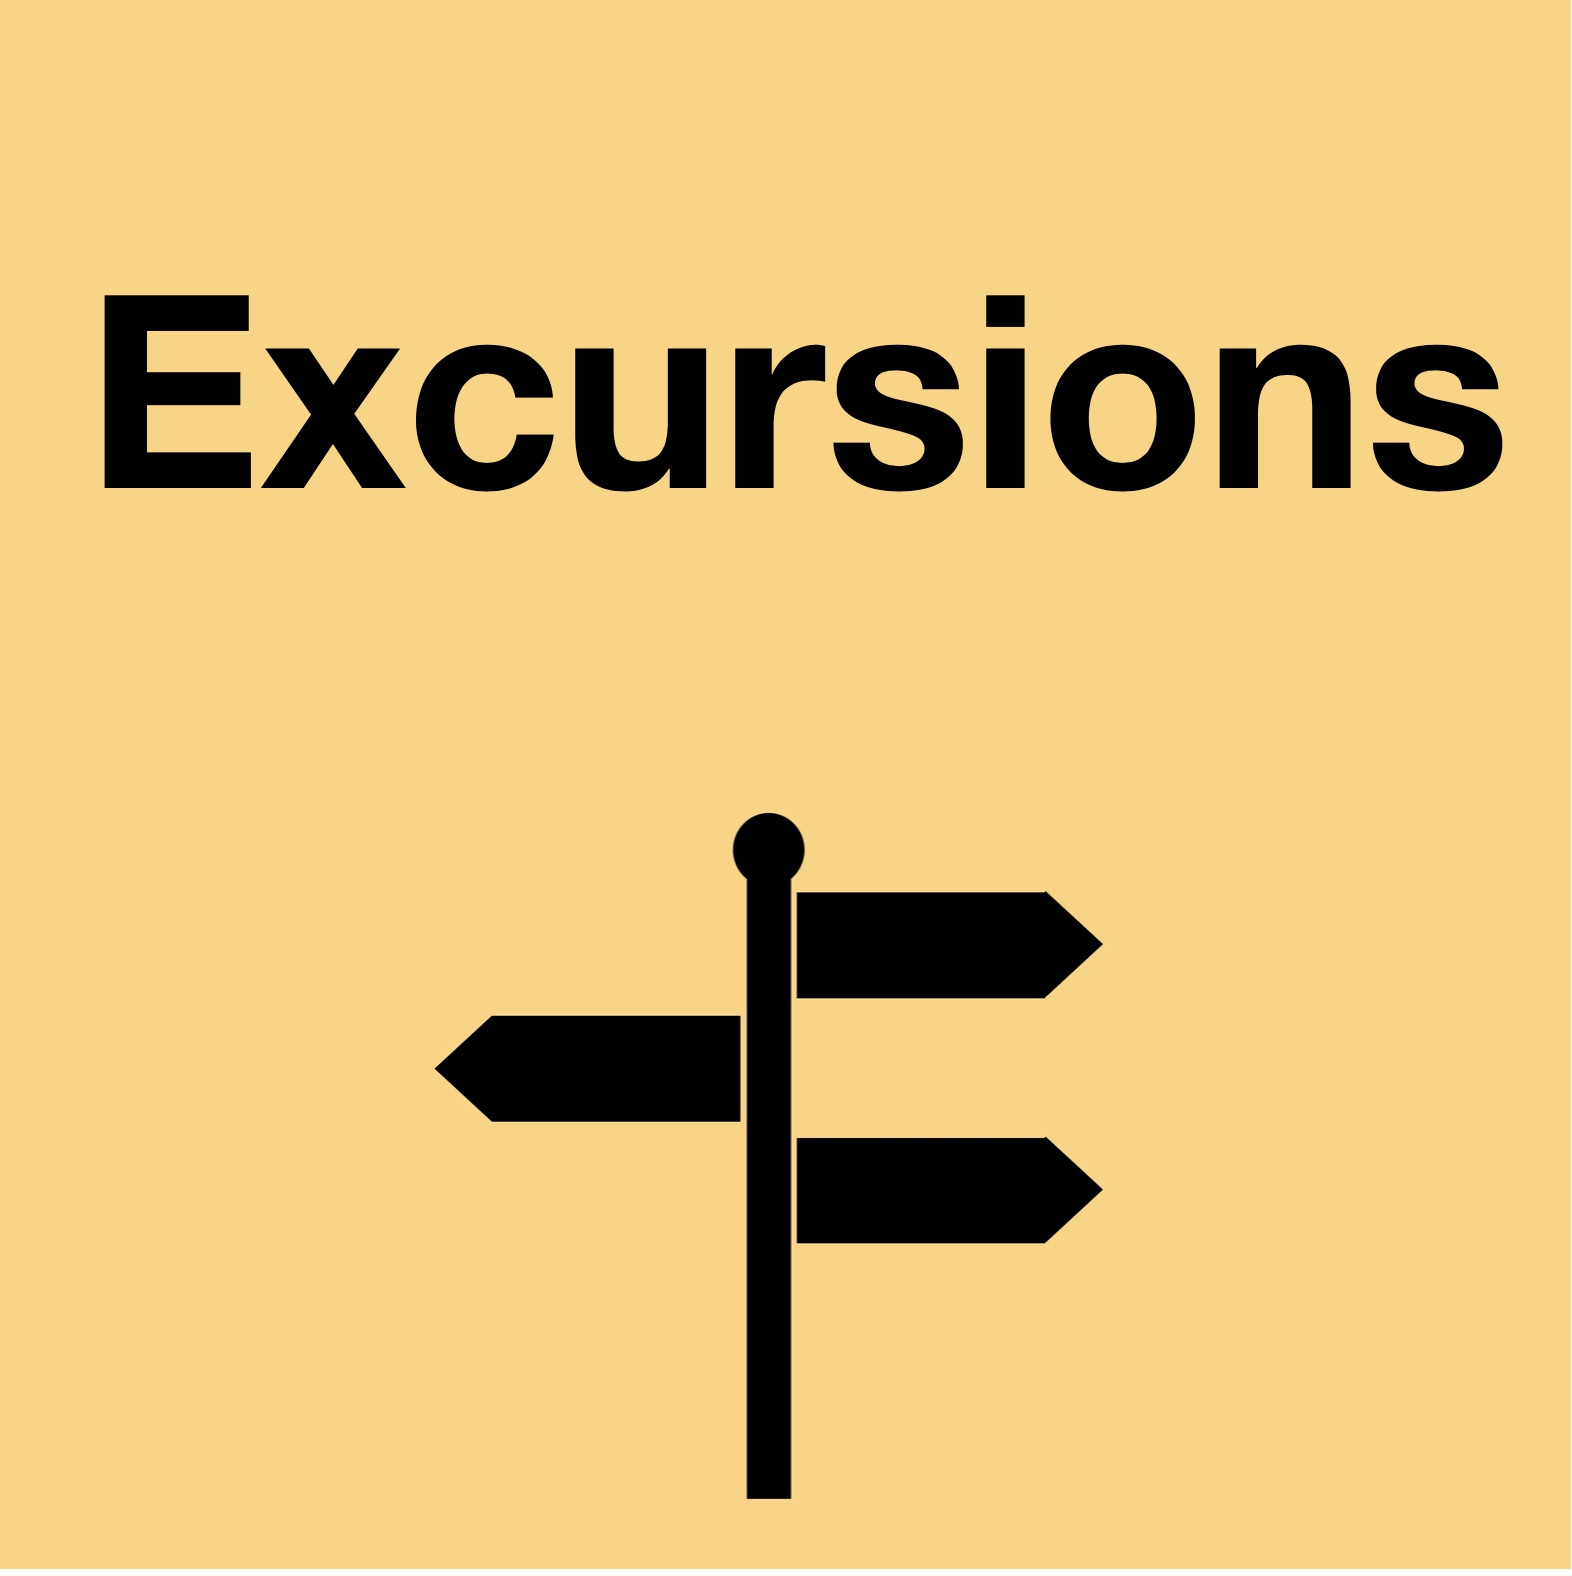 Excursions In Excursions